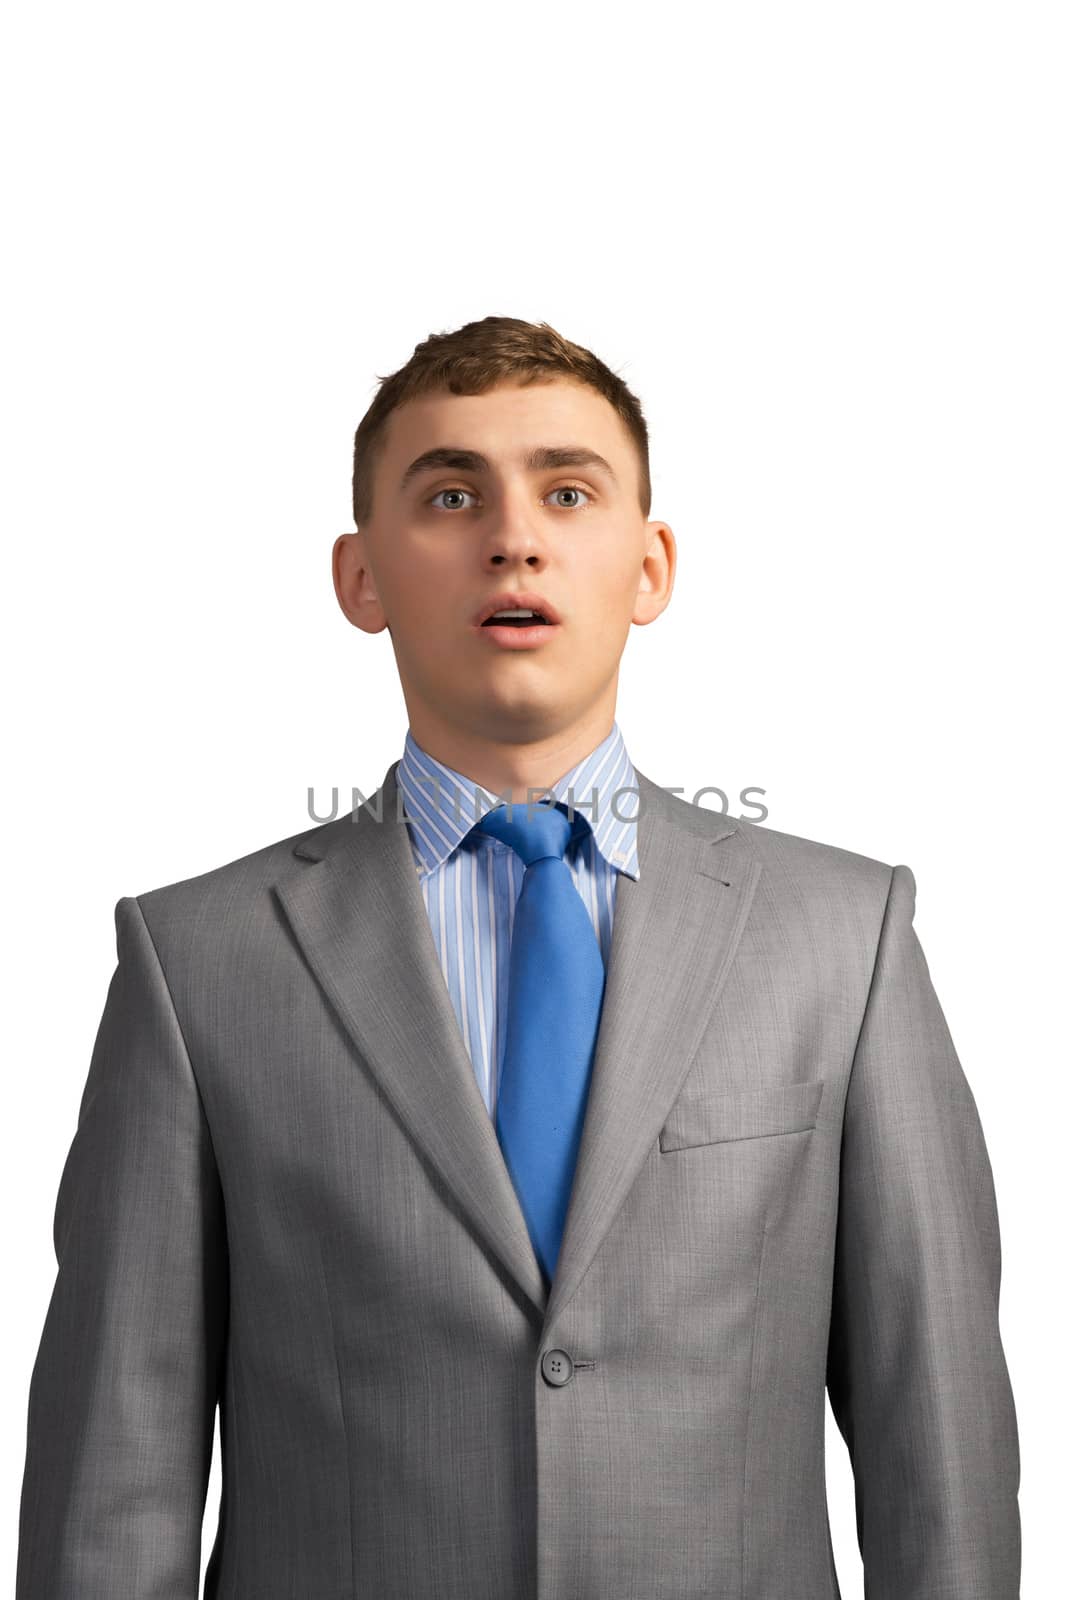 portrait of a young businessman, stares into the camera, isolated on white background